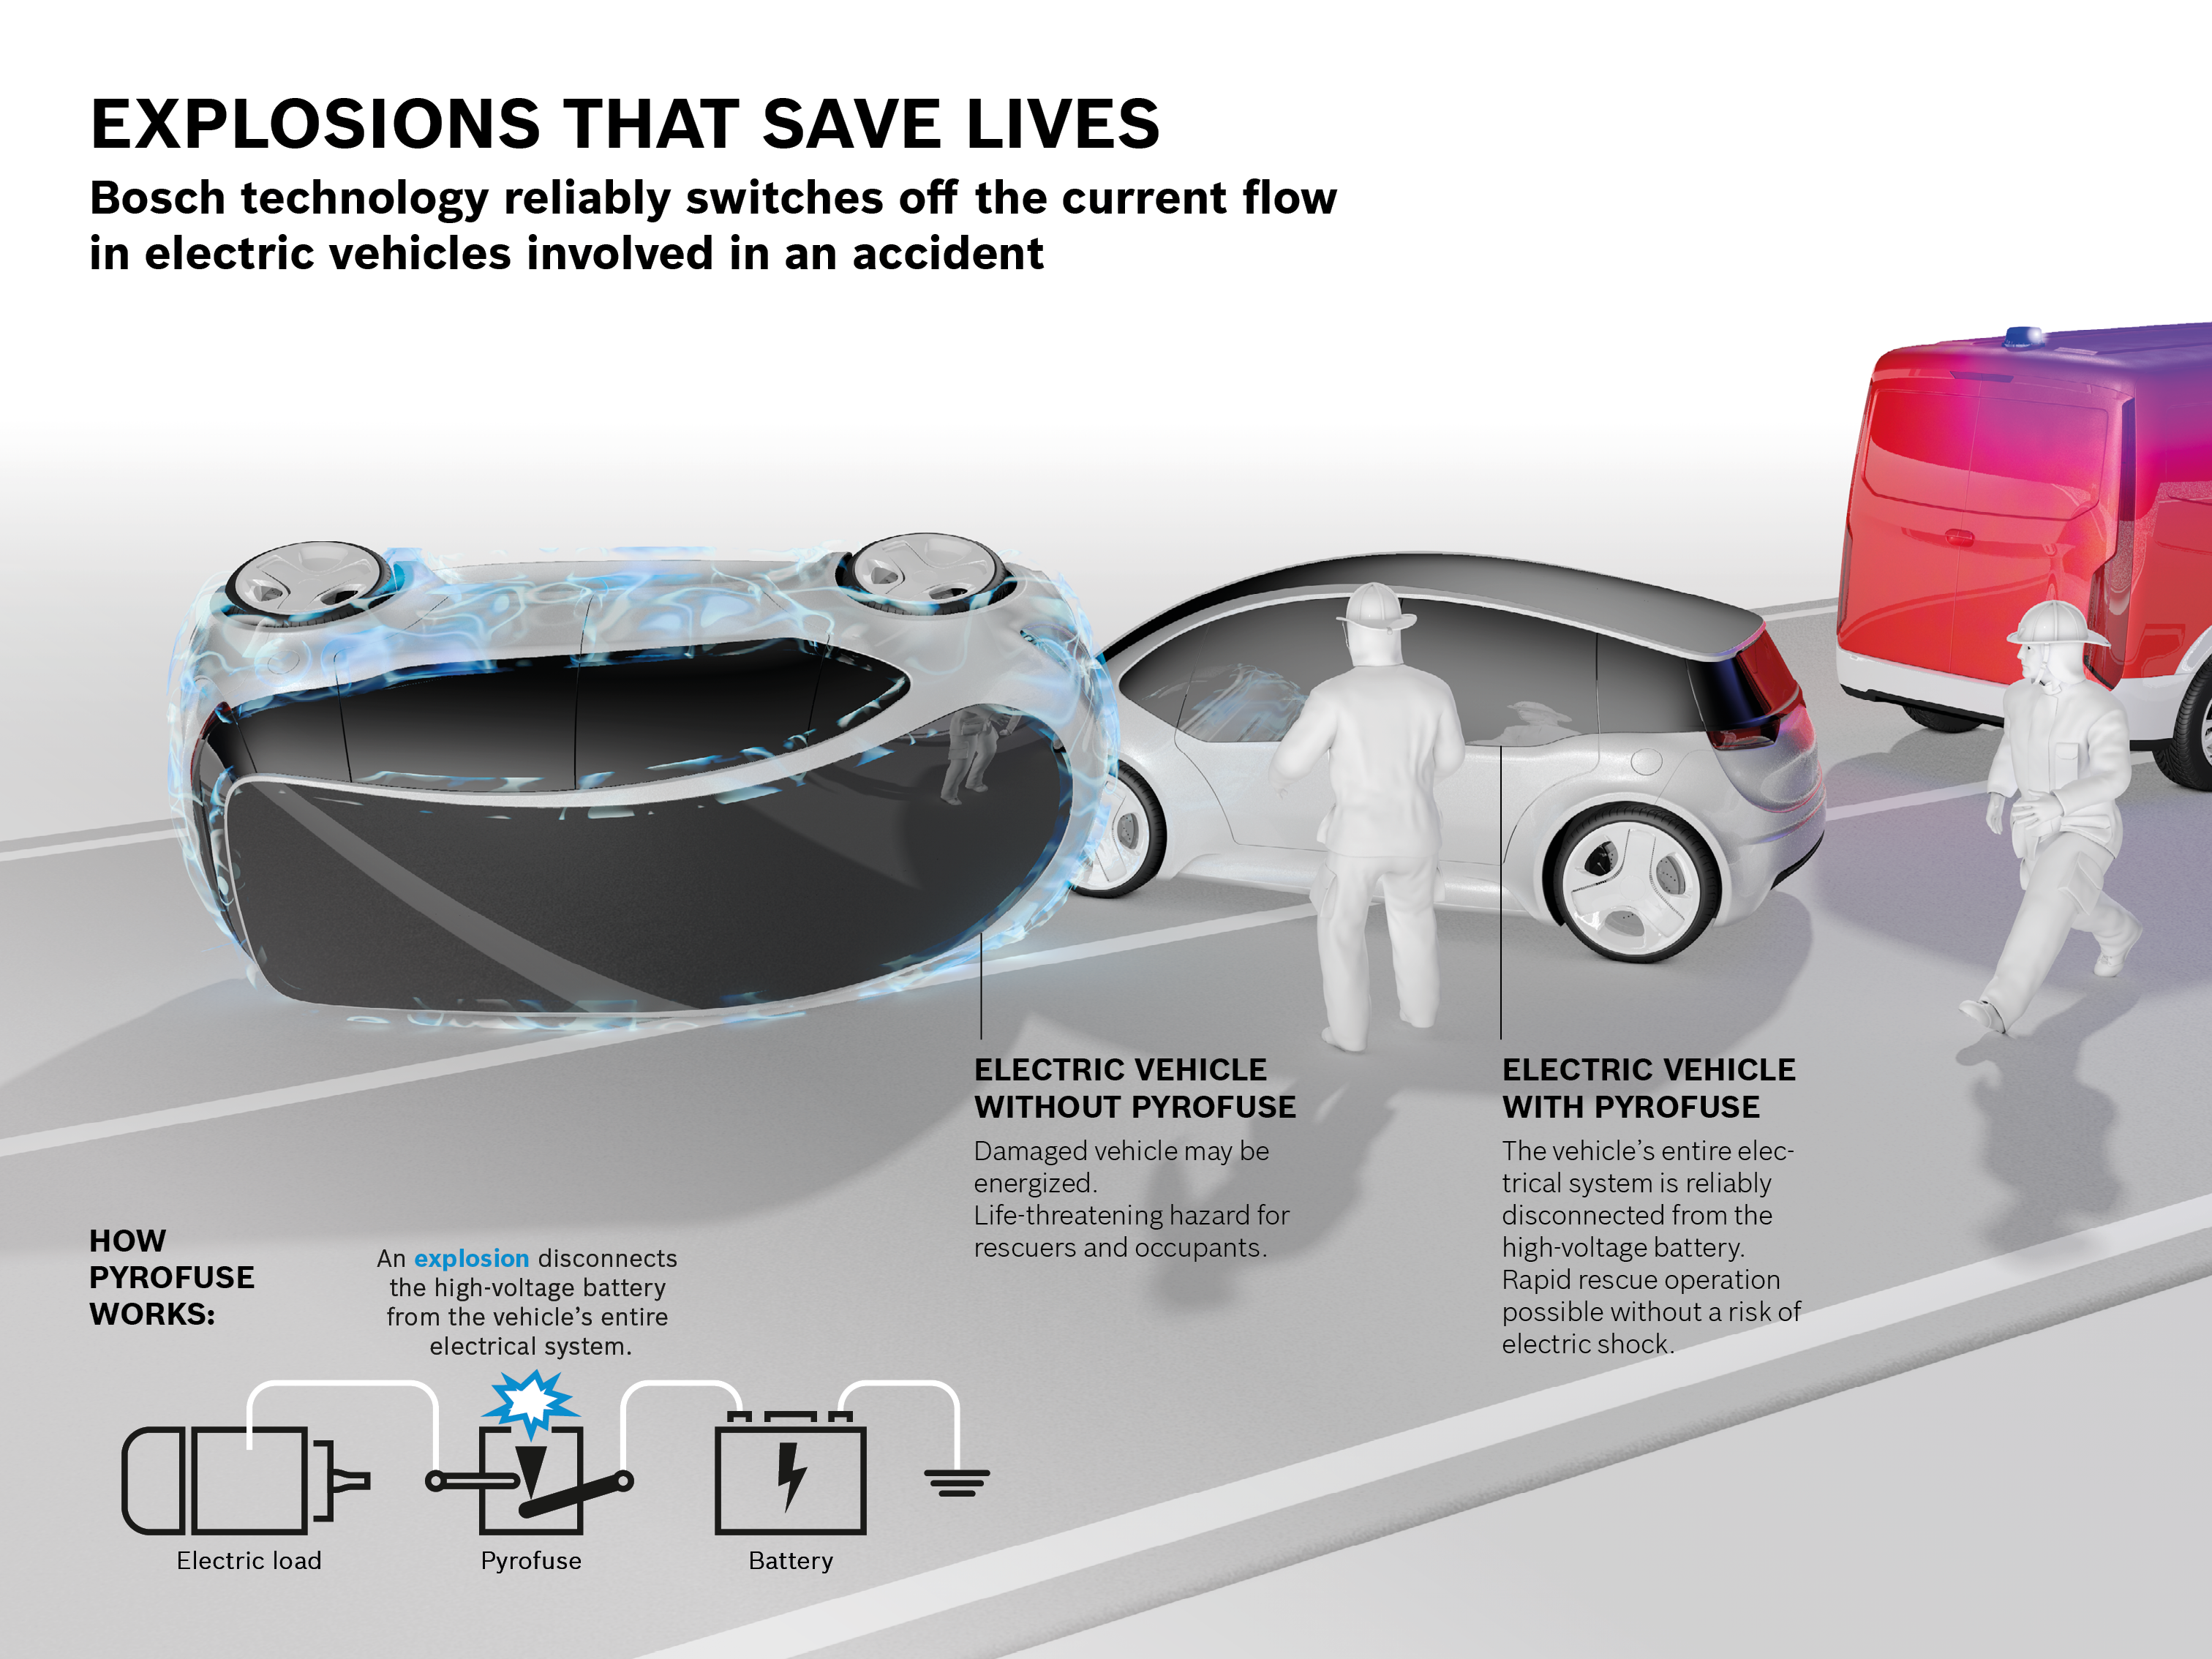 Bosch devices prevent electric shock when electric vehicles are involved in accidents